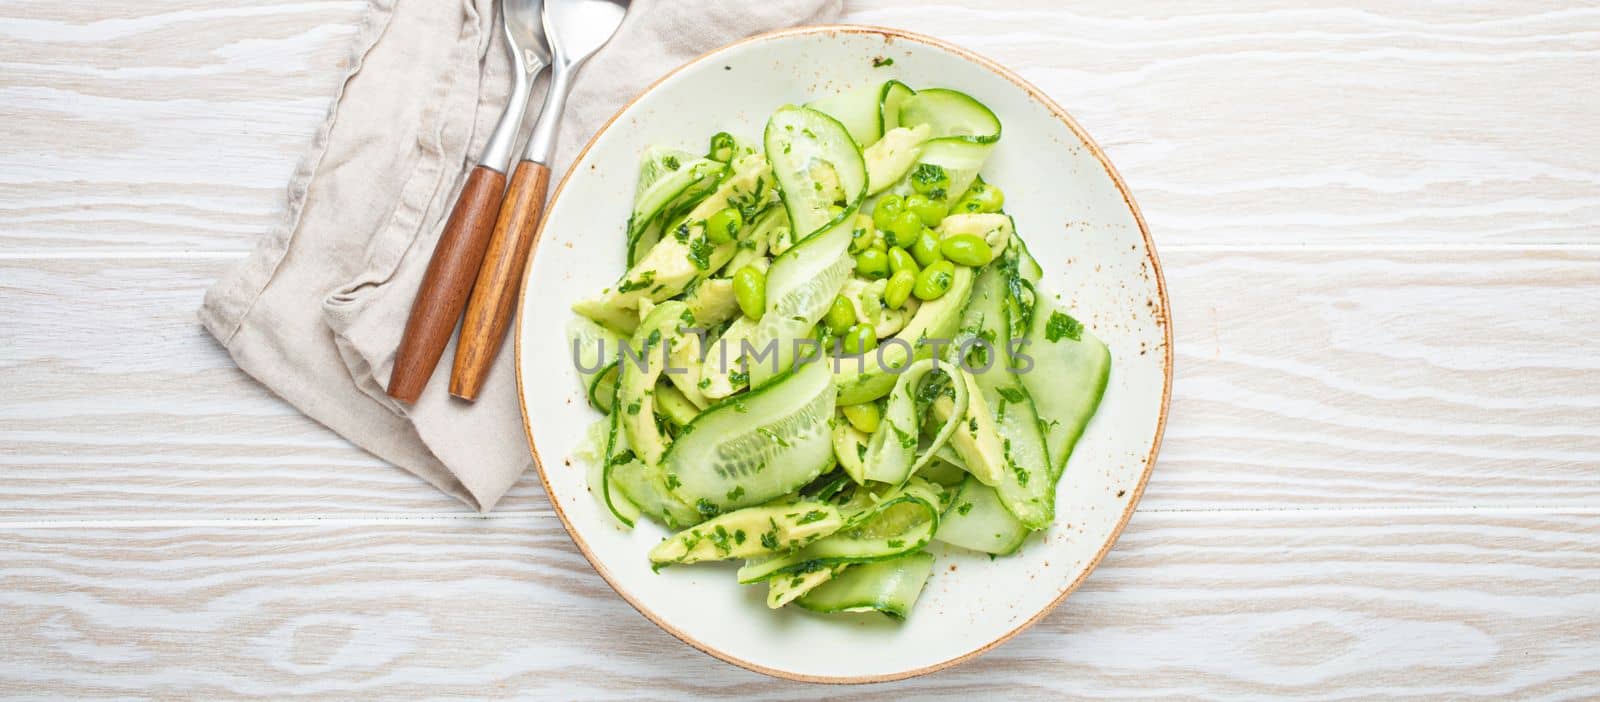 Healthy vegan green avocado salad bowl with sliced cucumbers, edamame beans, olive oil and herbs on ceramic plate top view, white wooden rustic table background by its_al_dente